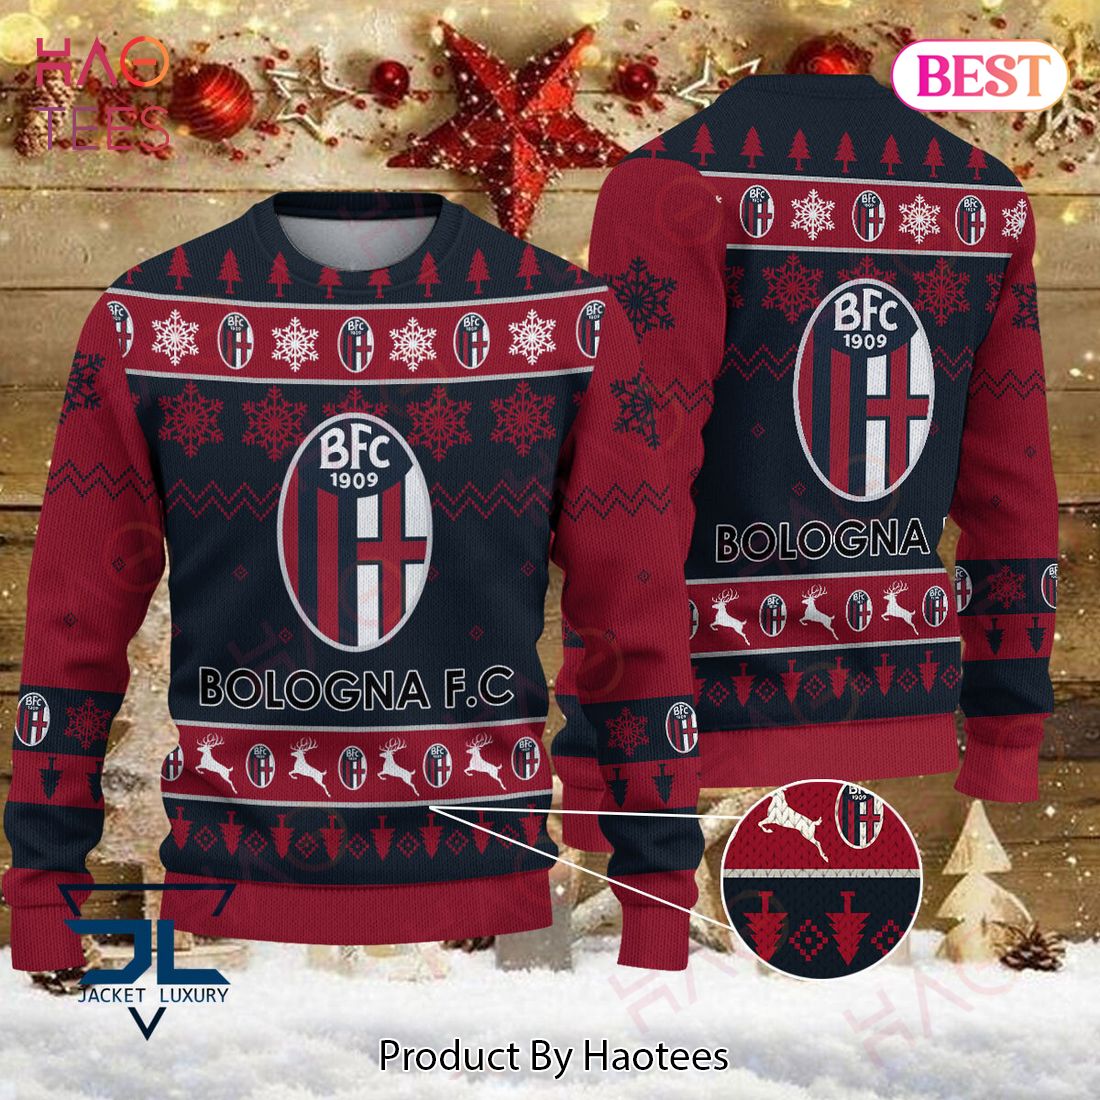 HOT Bologna Fc 1909 Red Mix Black Christmas Luxury Brand Sweater Limited Edition